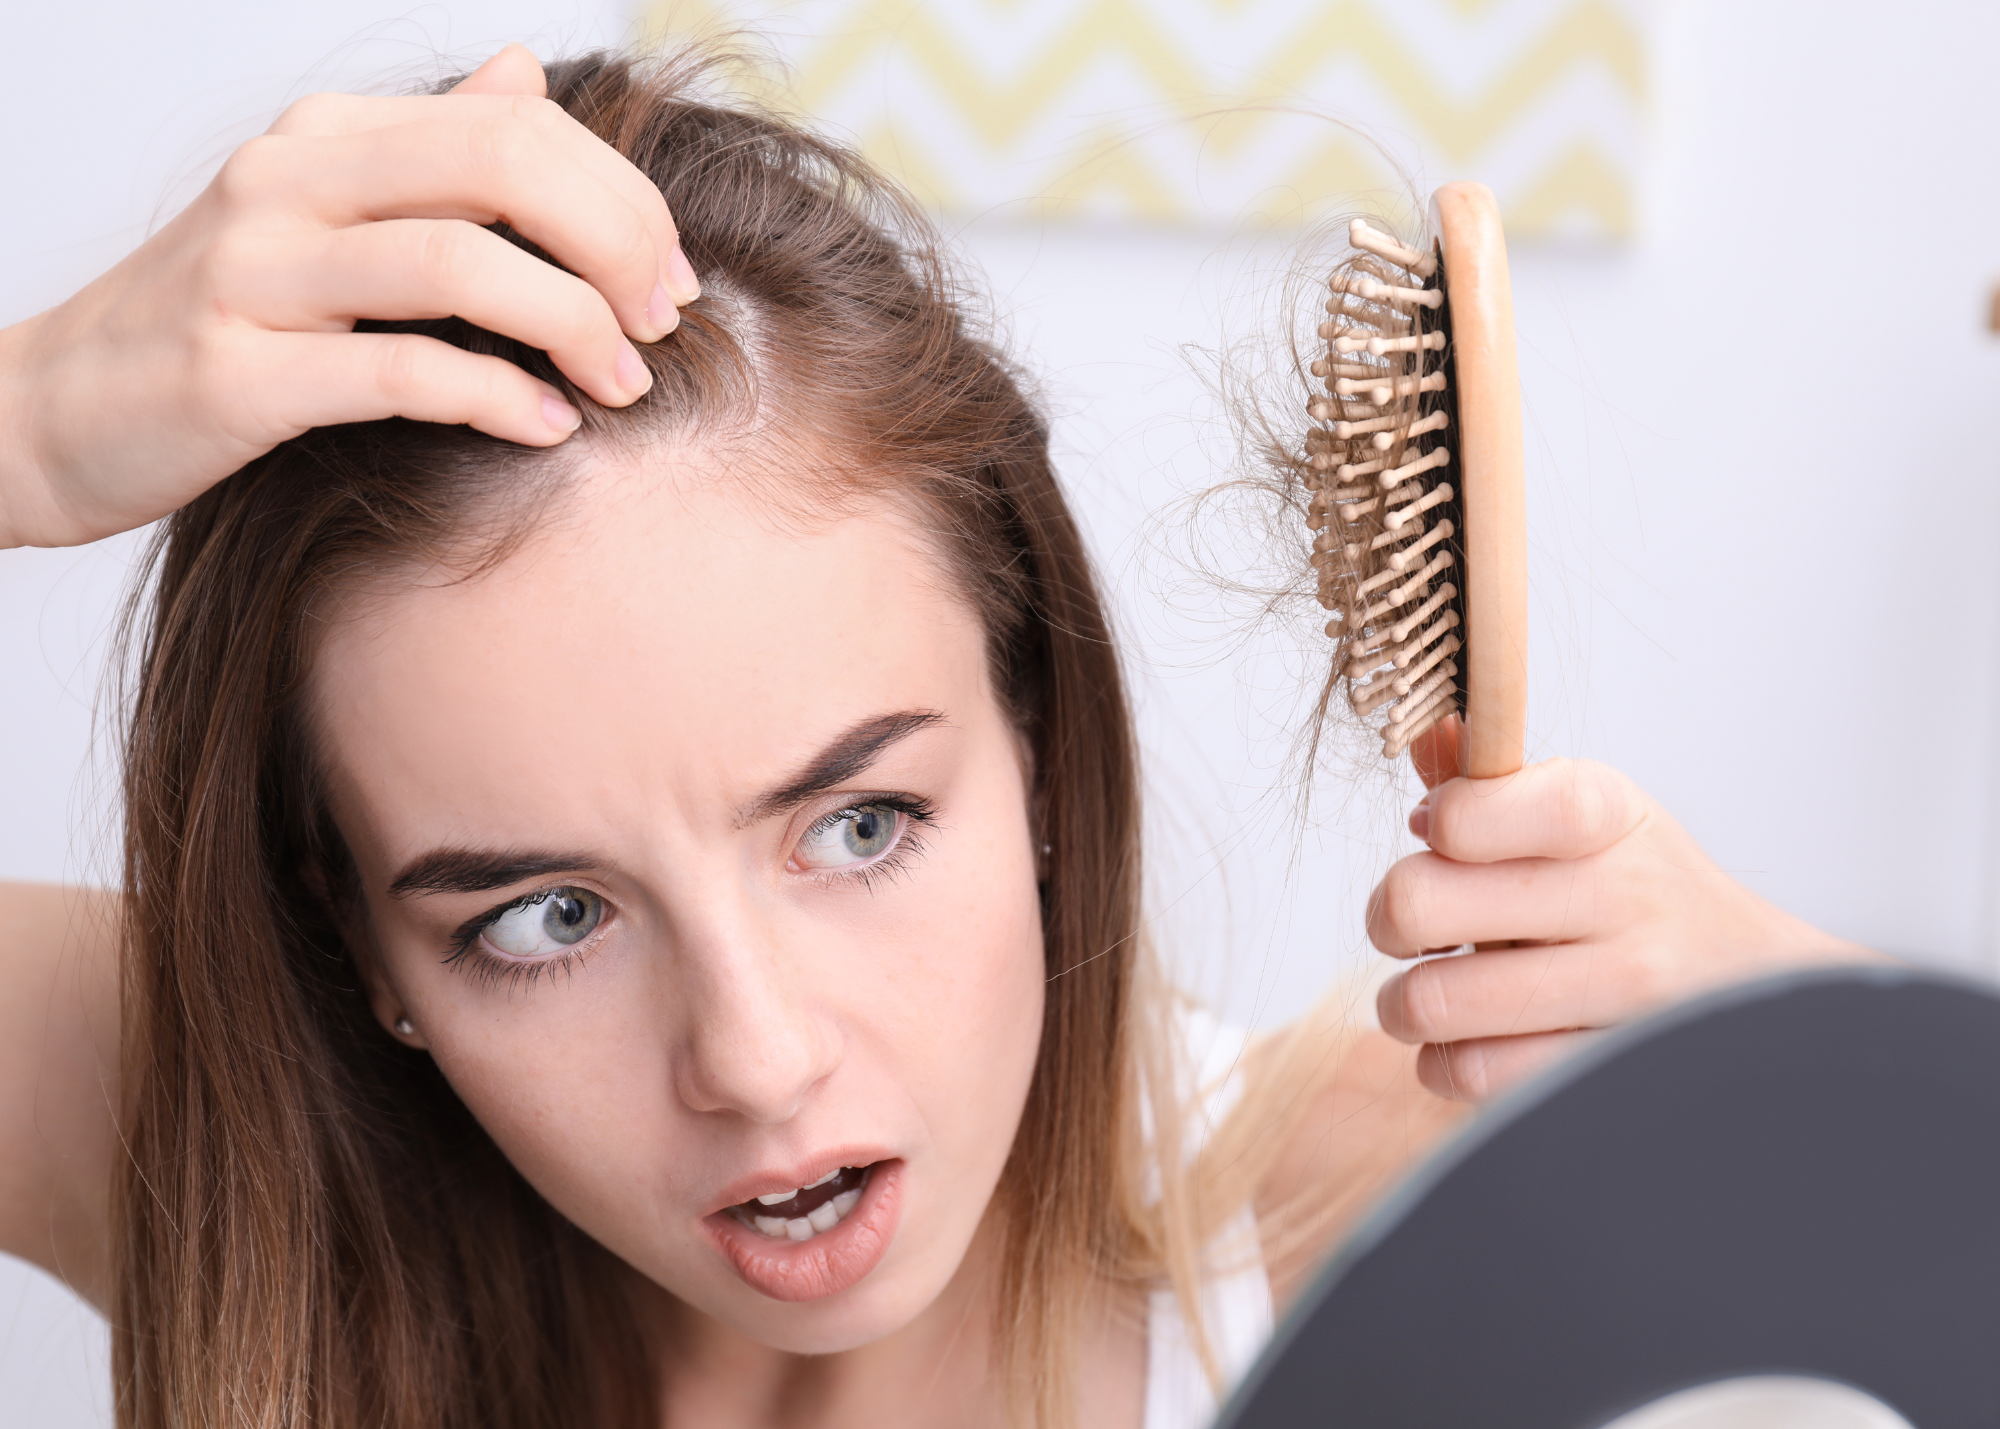 Hair Loss and Mood: What do the Experts Say?